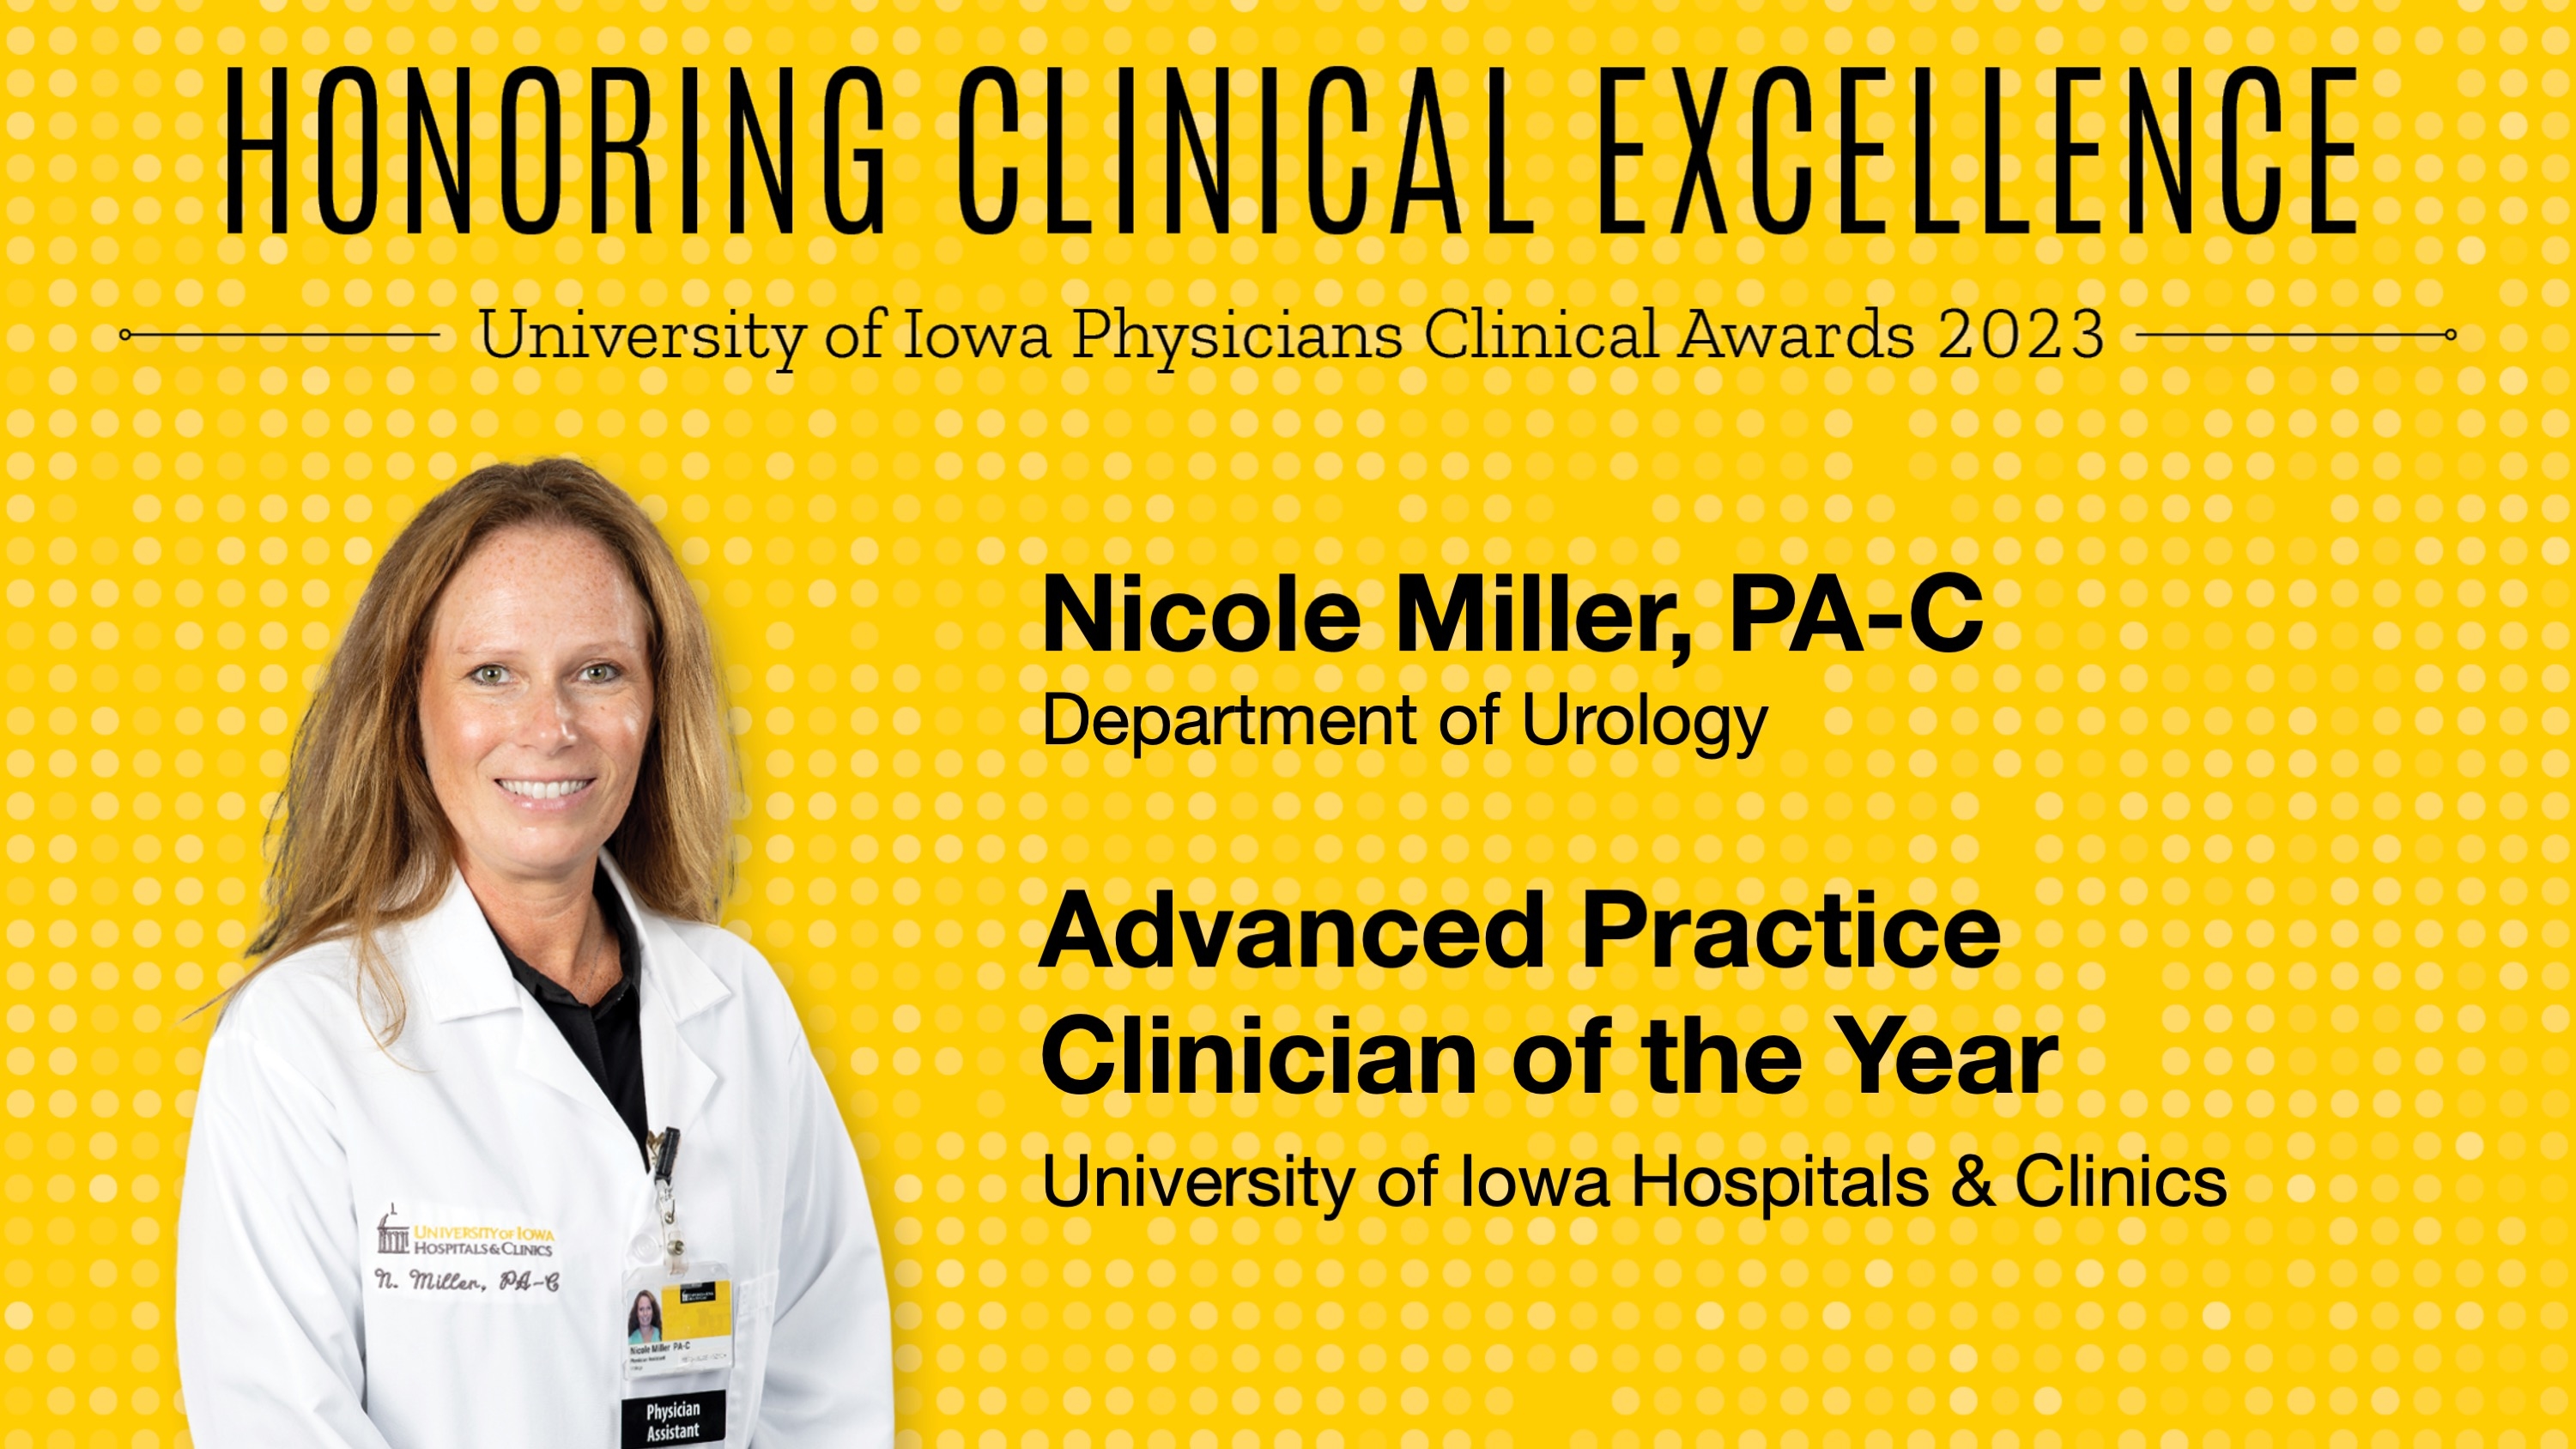 Nicole Miller, PA-C, UI Health Care Advanced Practice Clinician of the Year